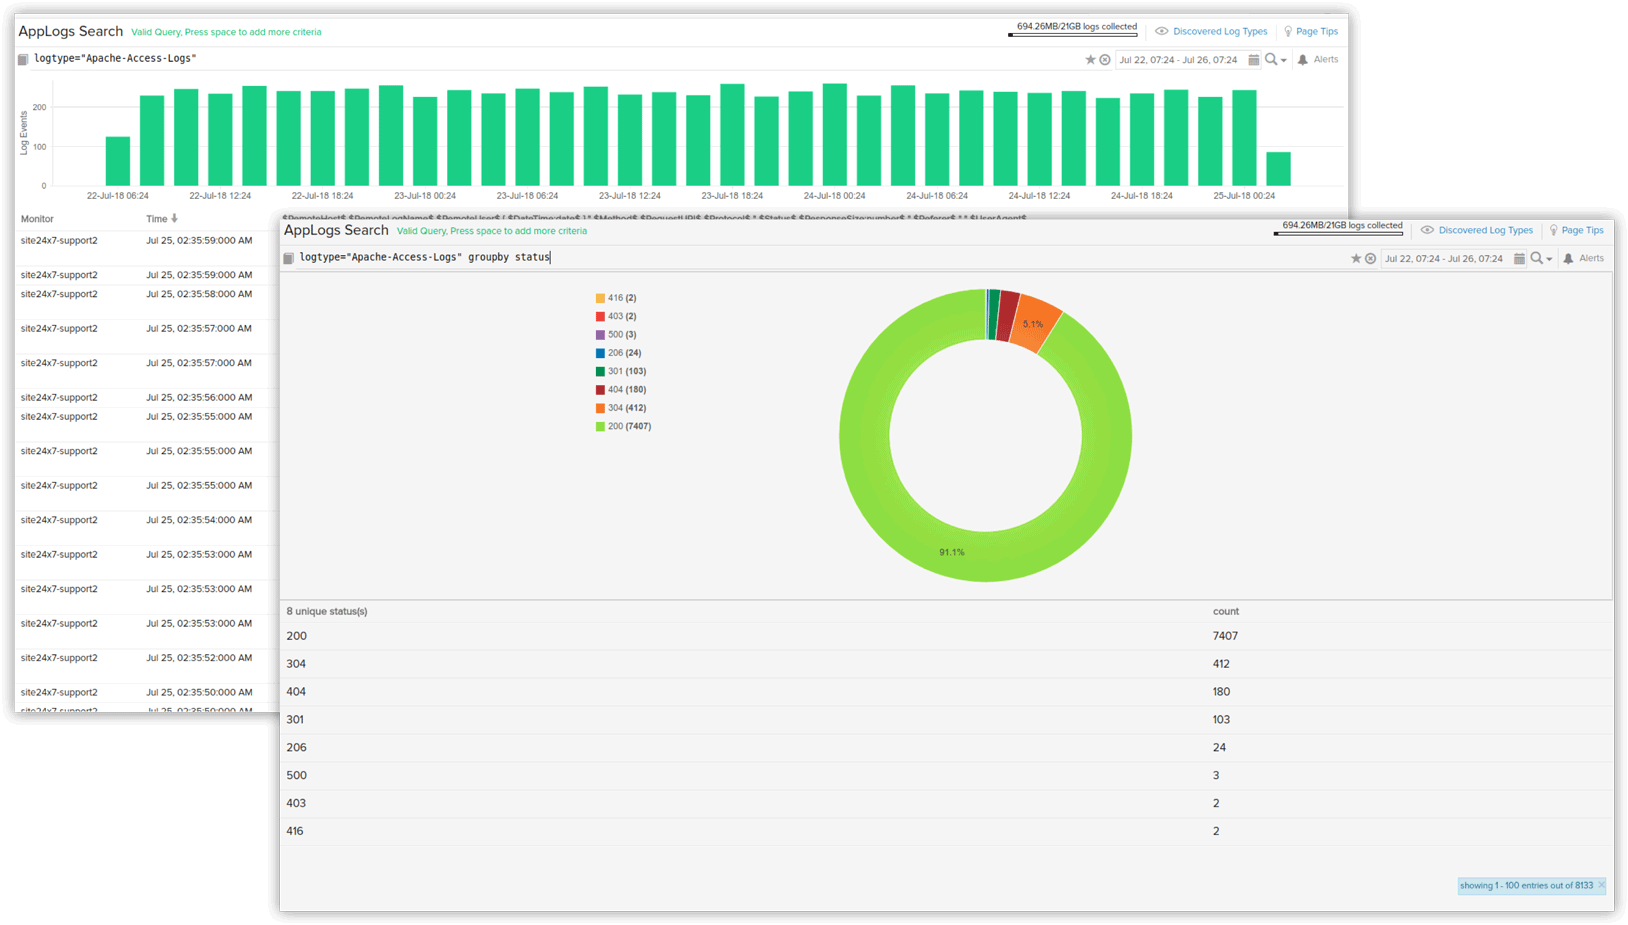 AWS performance monitoring - Site24x7